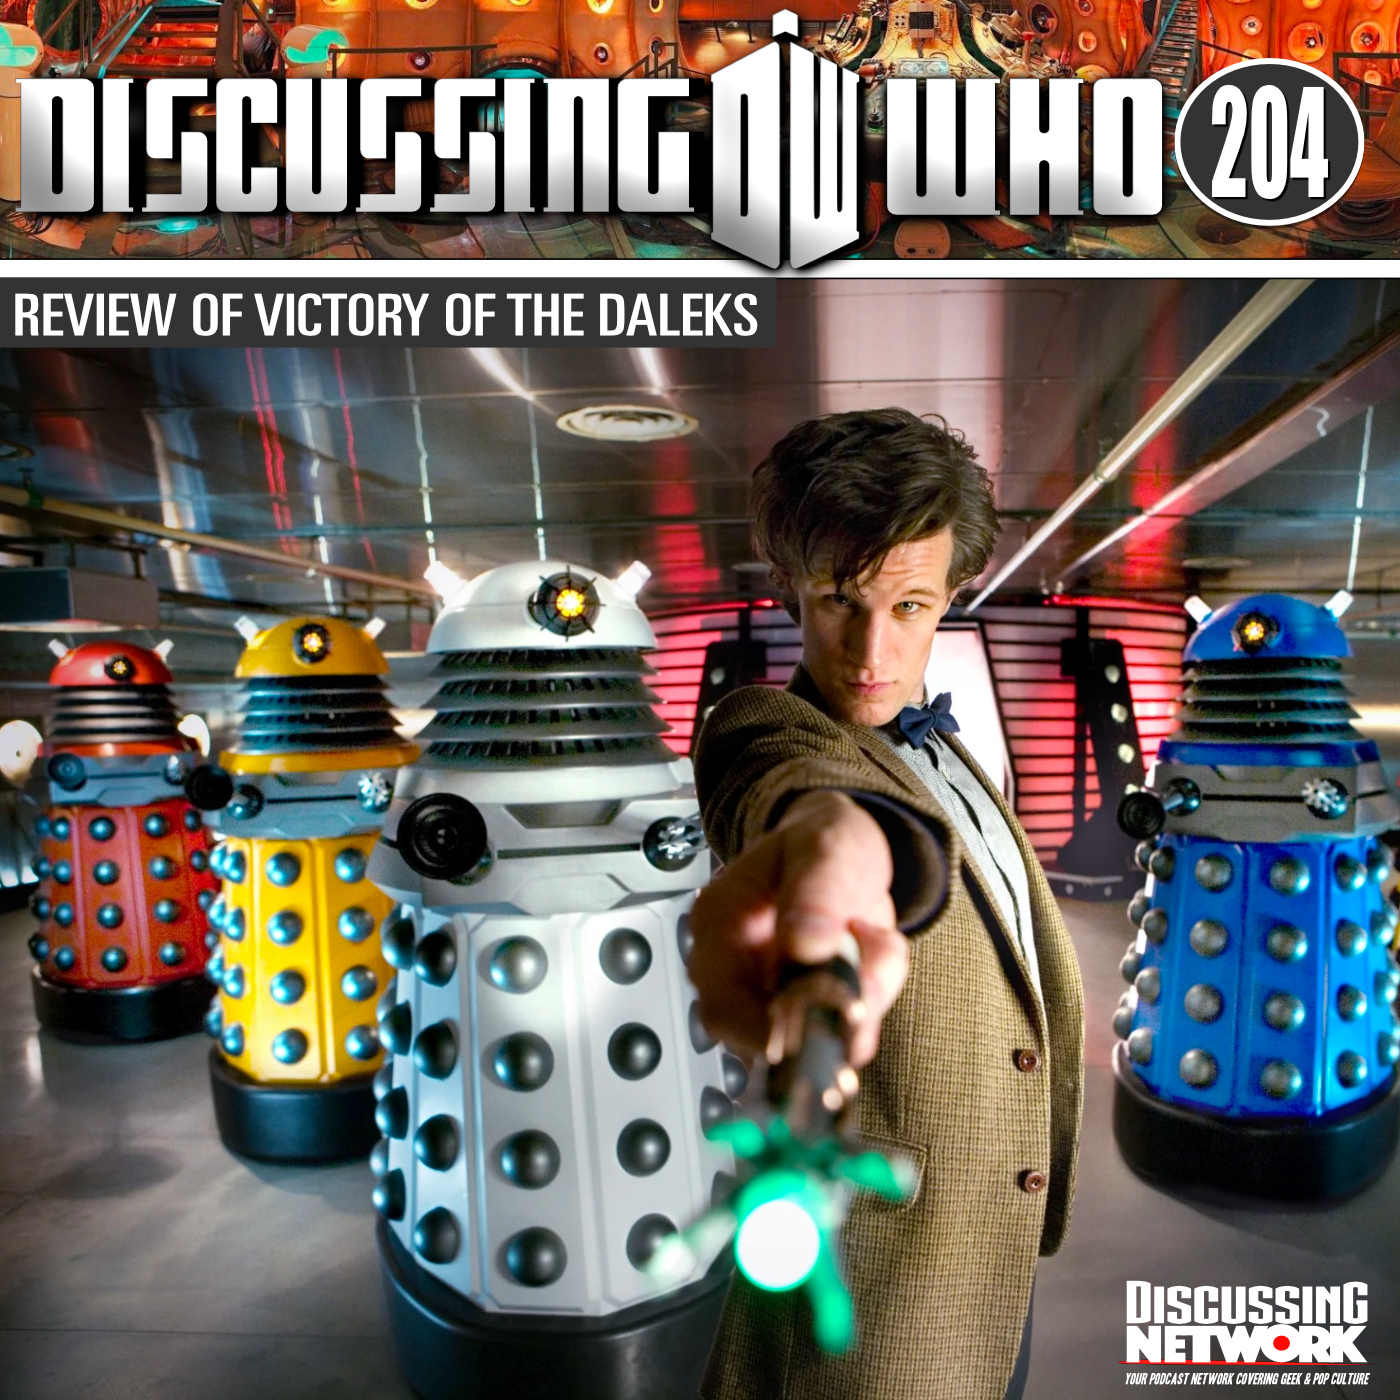 Review of Victory of the Daleks